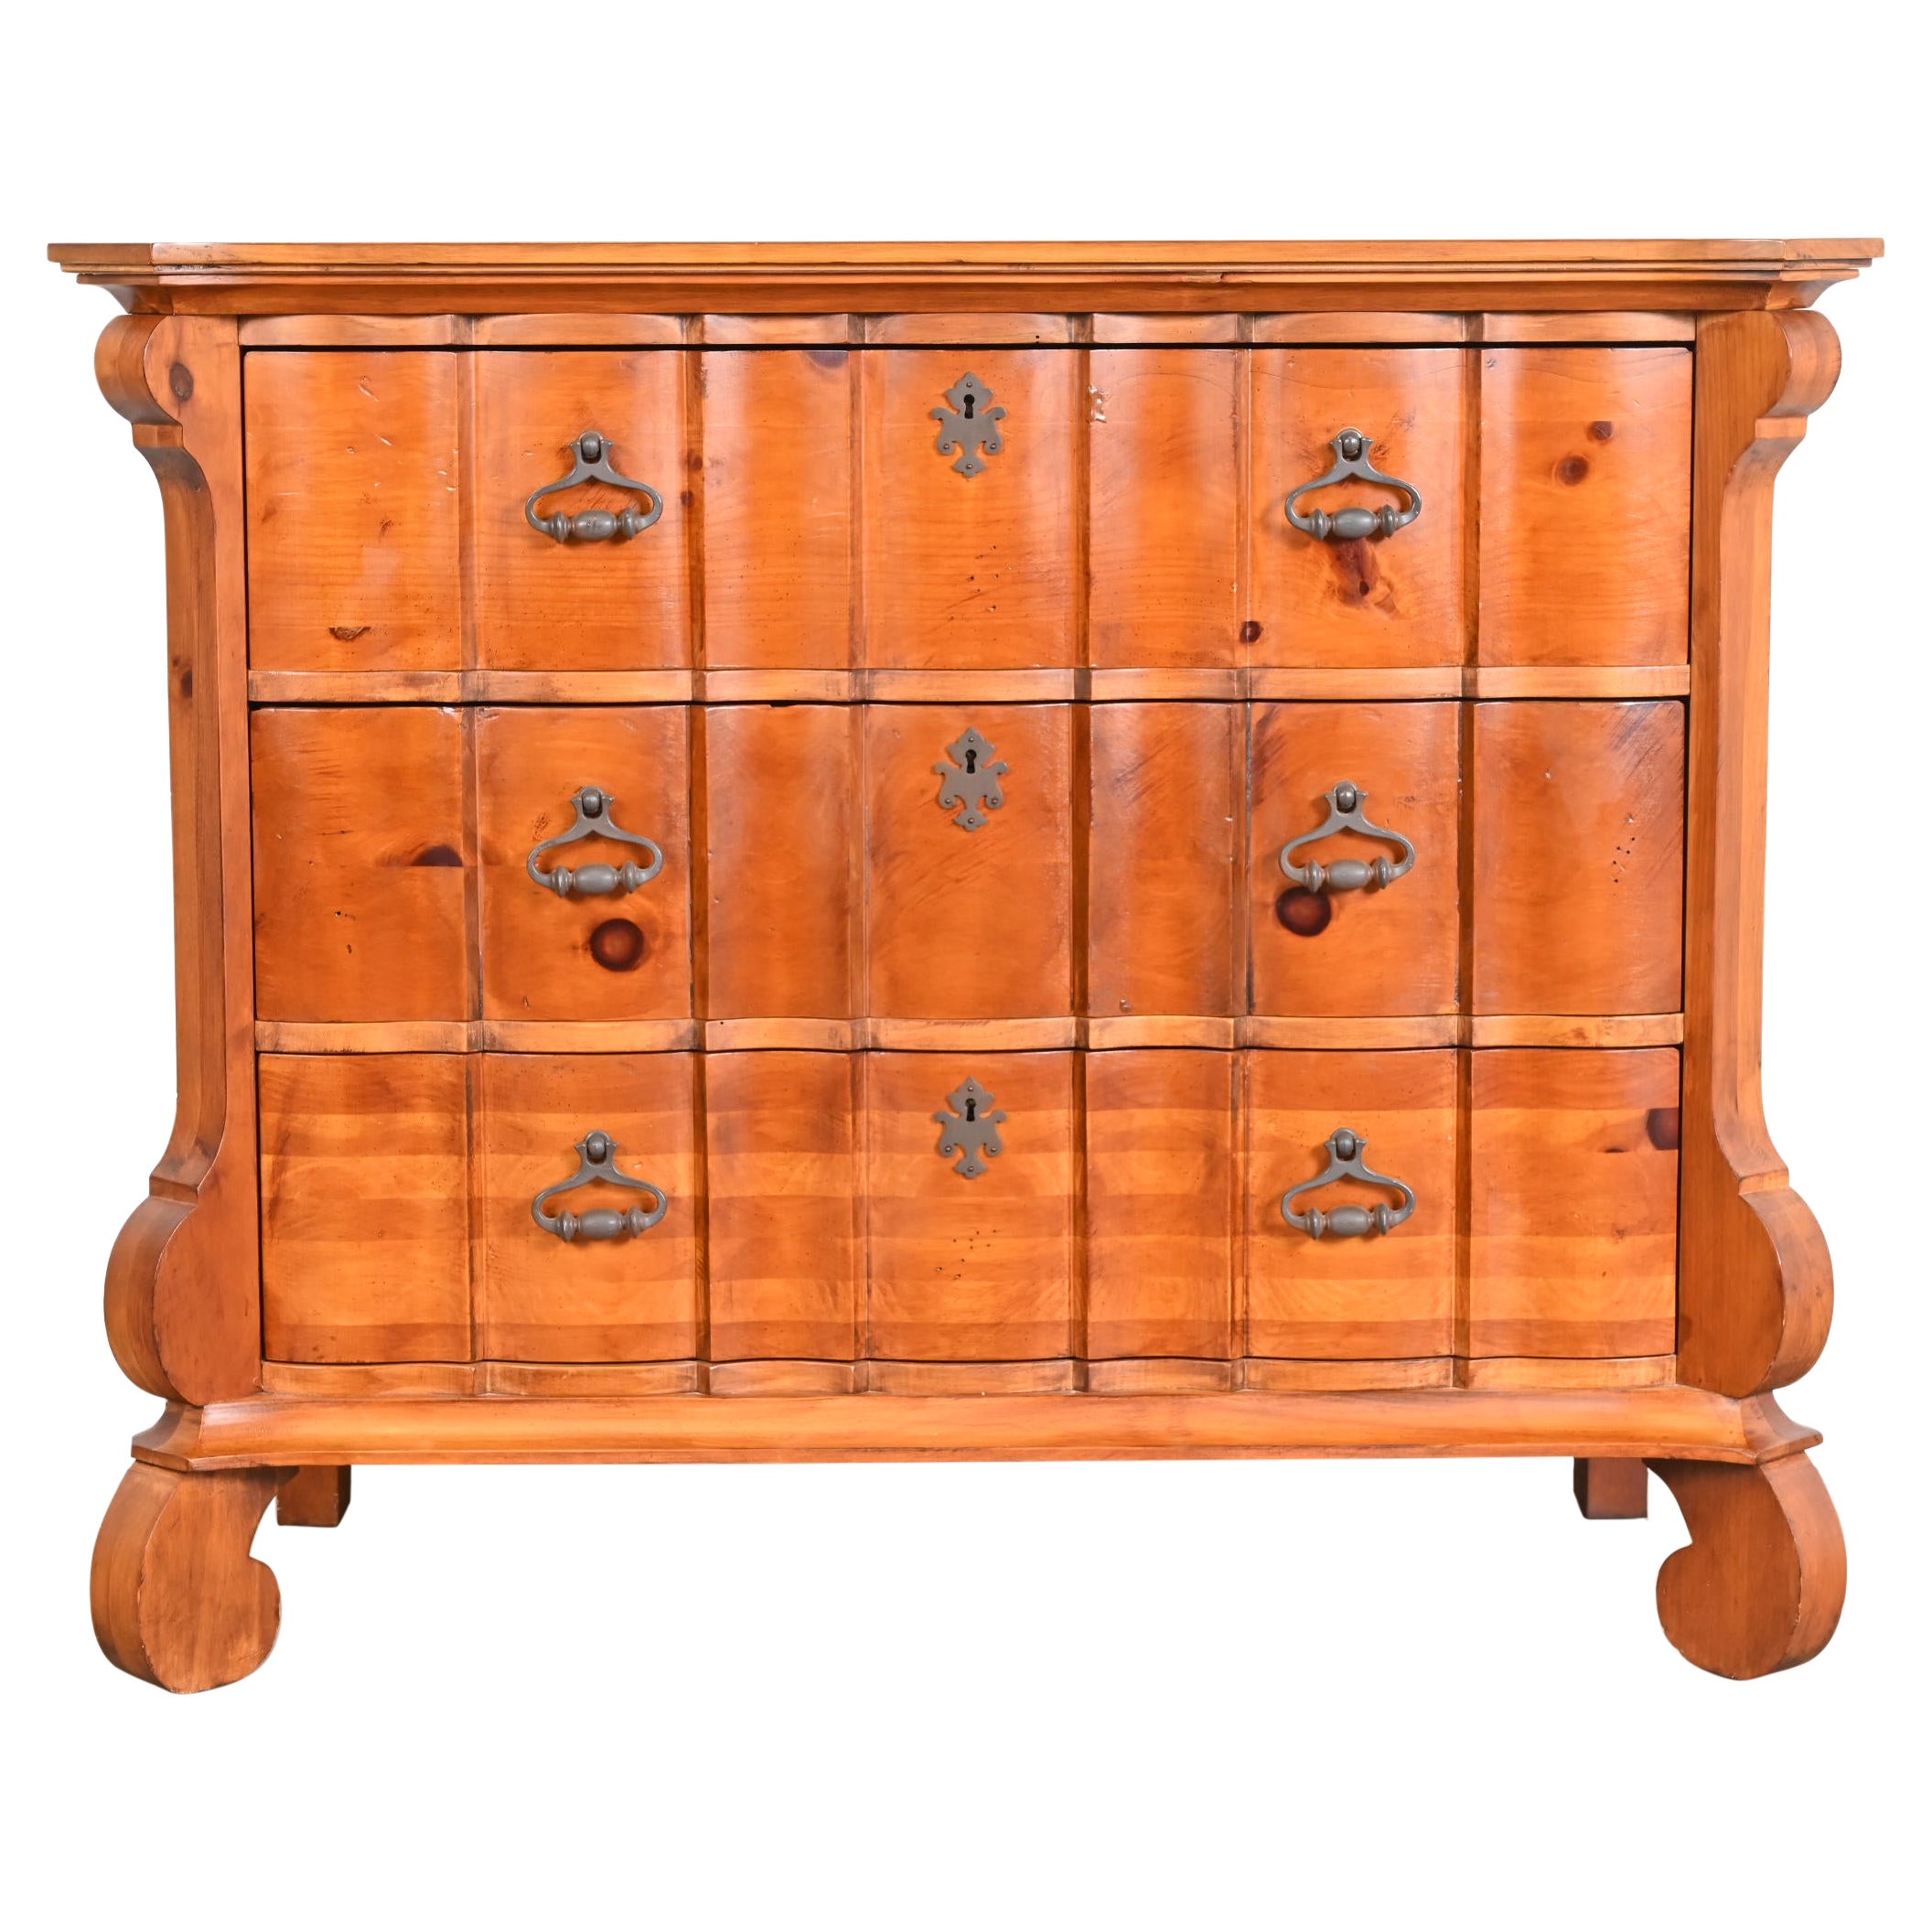 Romweber Spanish Baroque Carved Pine Commode or Chest of Drawers